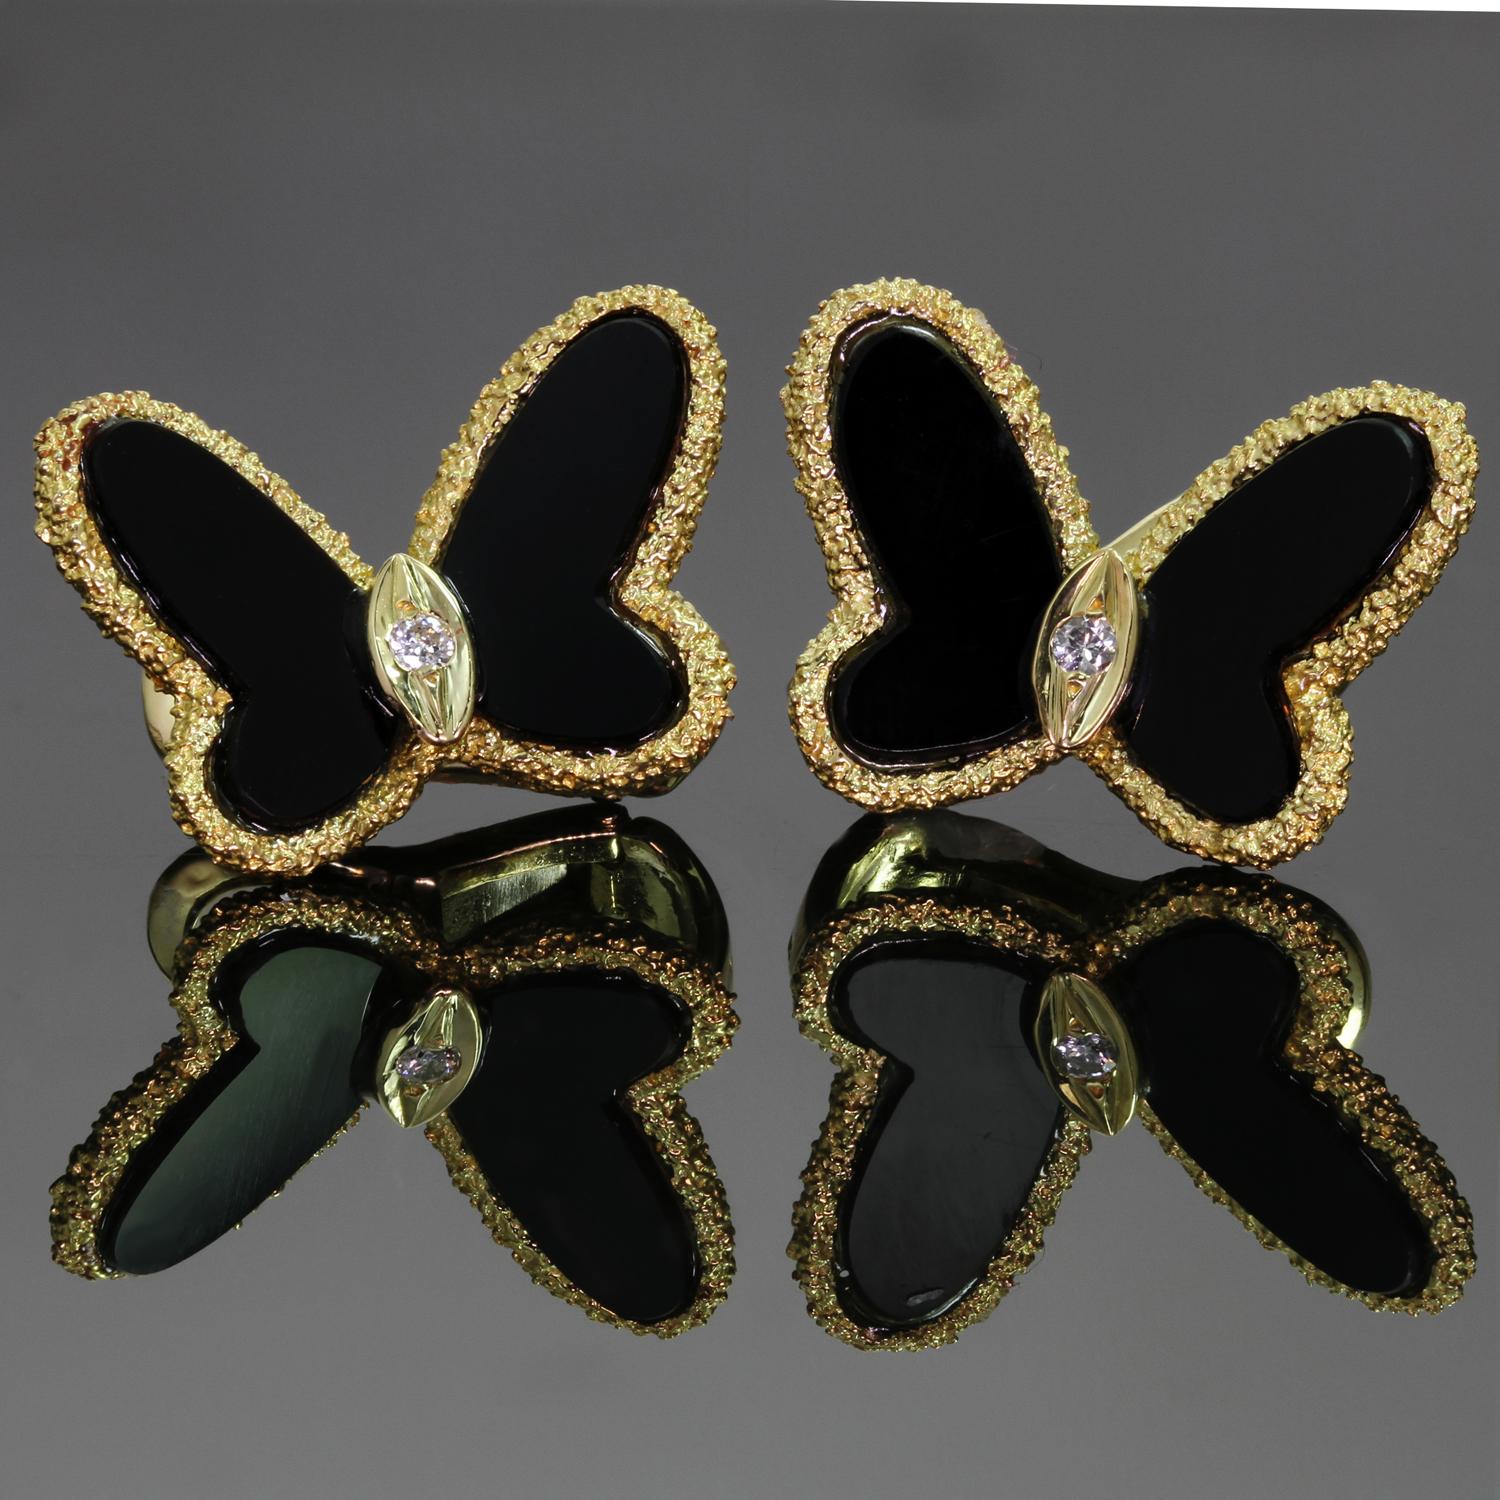 These gorgeous authentic Van Cleef & Arpels lever-back earrings feature the classic butterfly design crafted in 18k yellow gold and set with black onyx petals and  round brilliant D-E-F VVS1-VVS2 diamonds weighing an estimated 0.05 carats. Made in